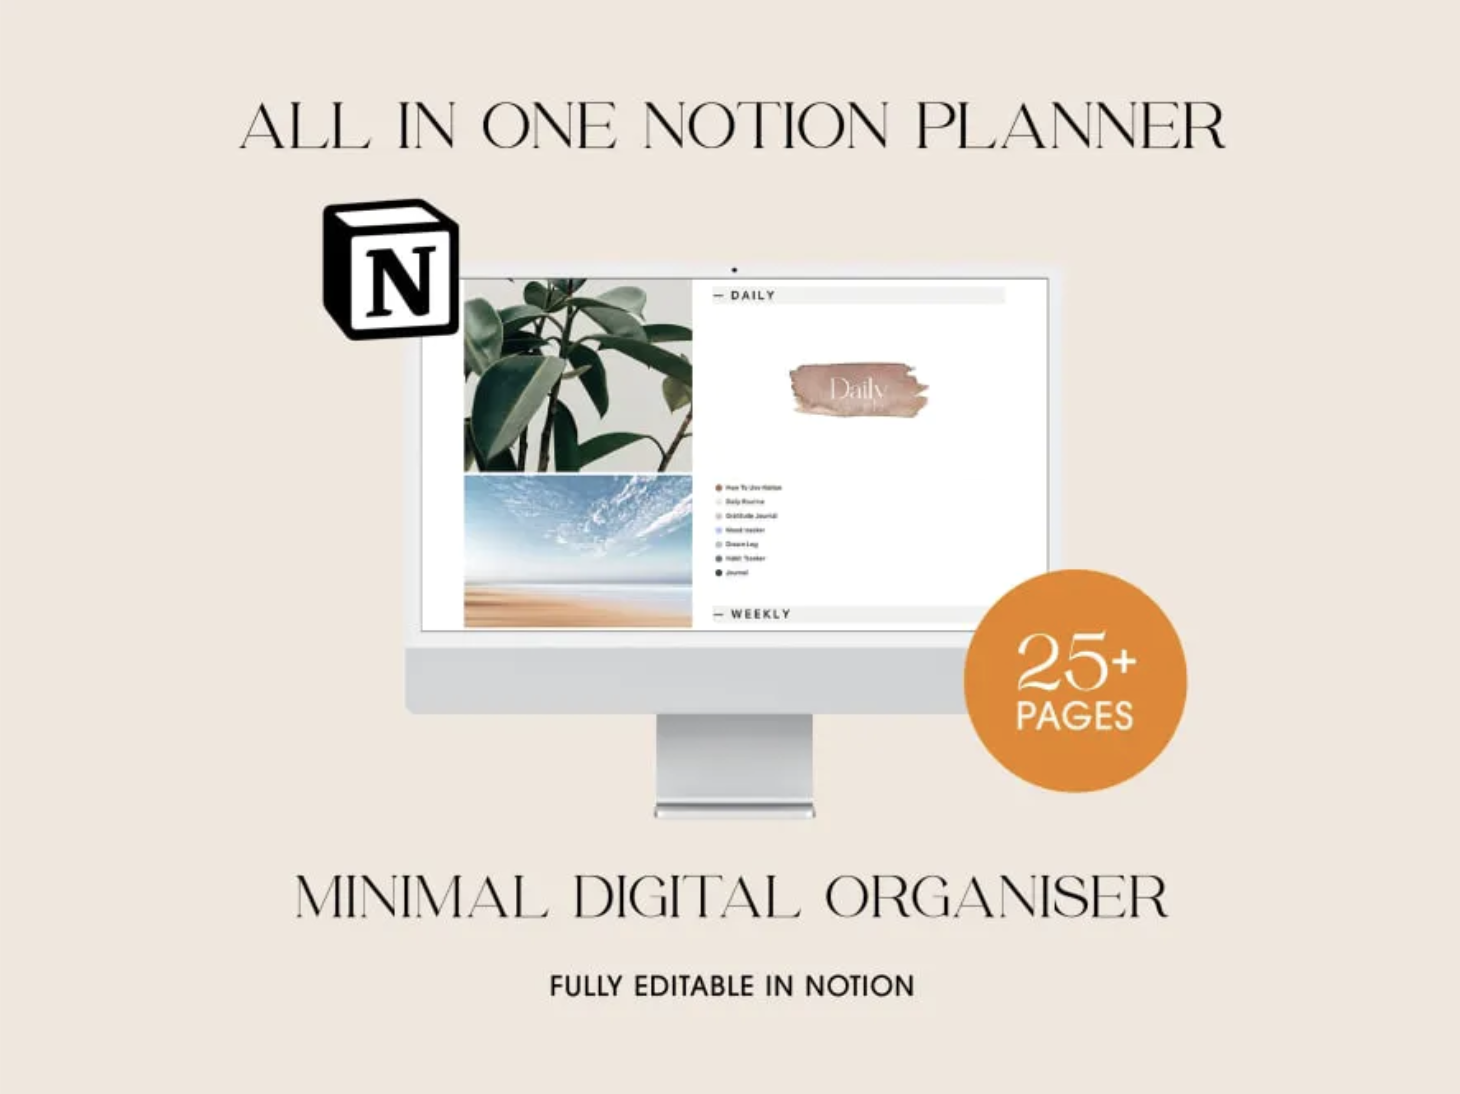 All In One Notion Planner template to replace your jumbled journal and to become an easy, functional way to organise your life and keep a journal to improve your life.